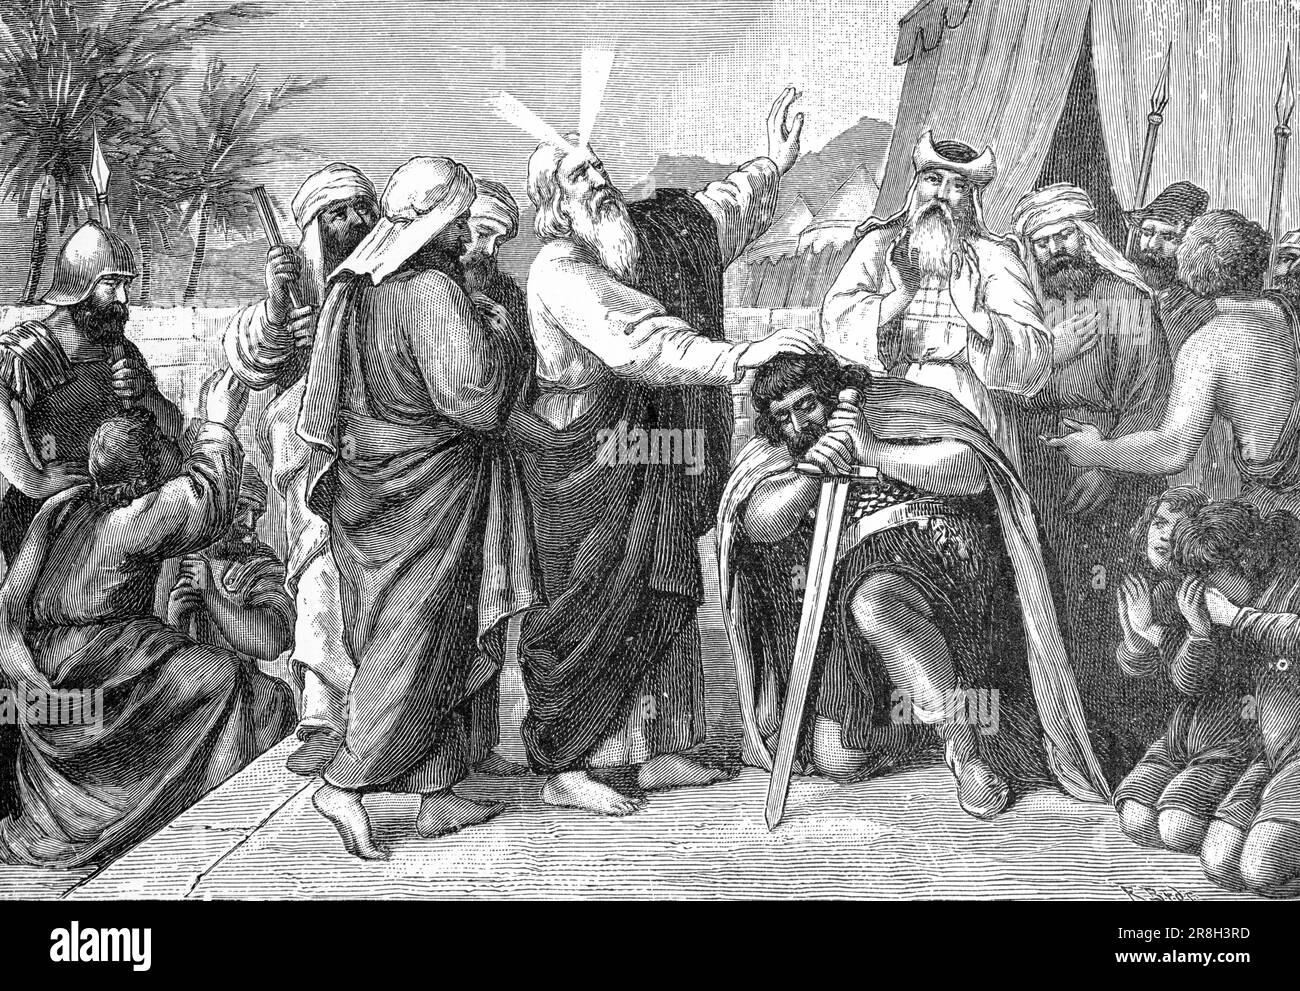 Joshua becomes leader of the people, Fifth Book Mose, chapter 31, verse 14f, Old Testament, Bible, historic illustration 1890 Stock Photo